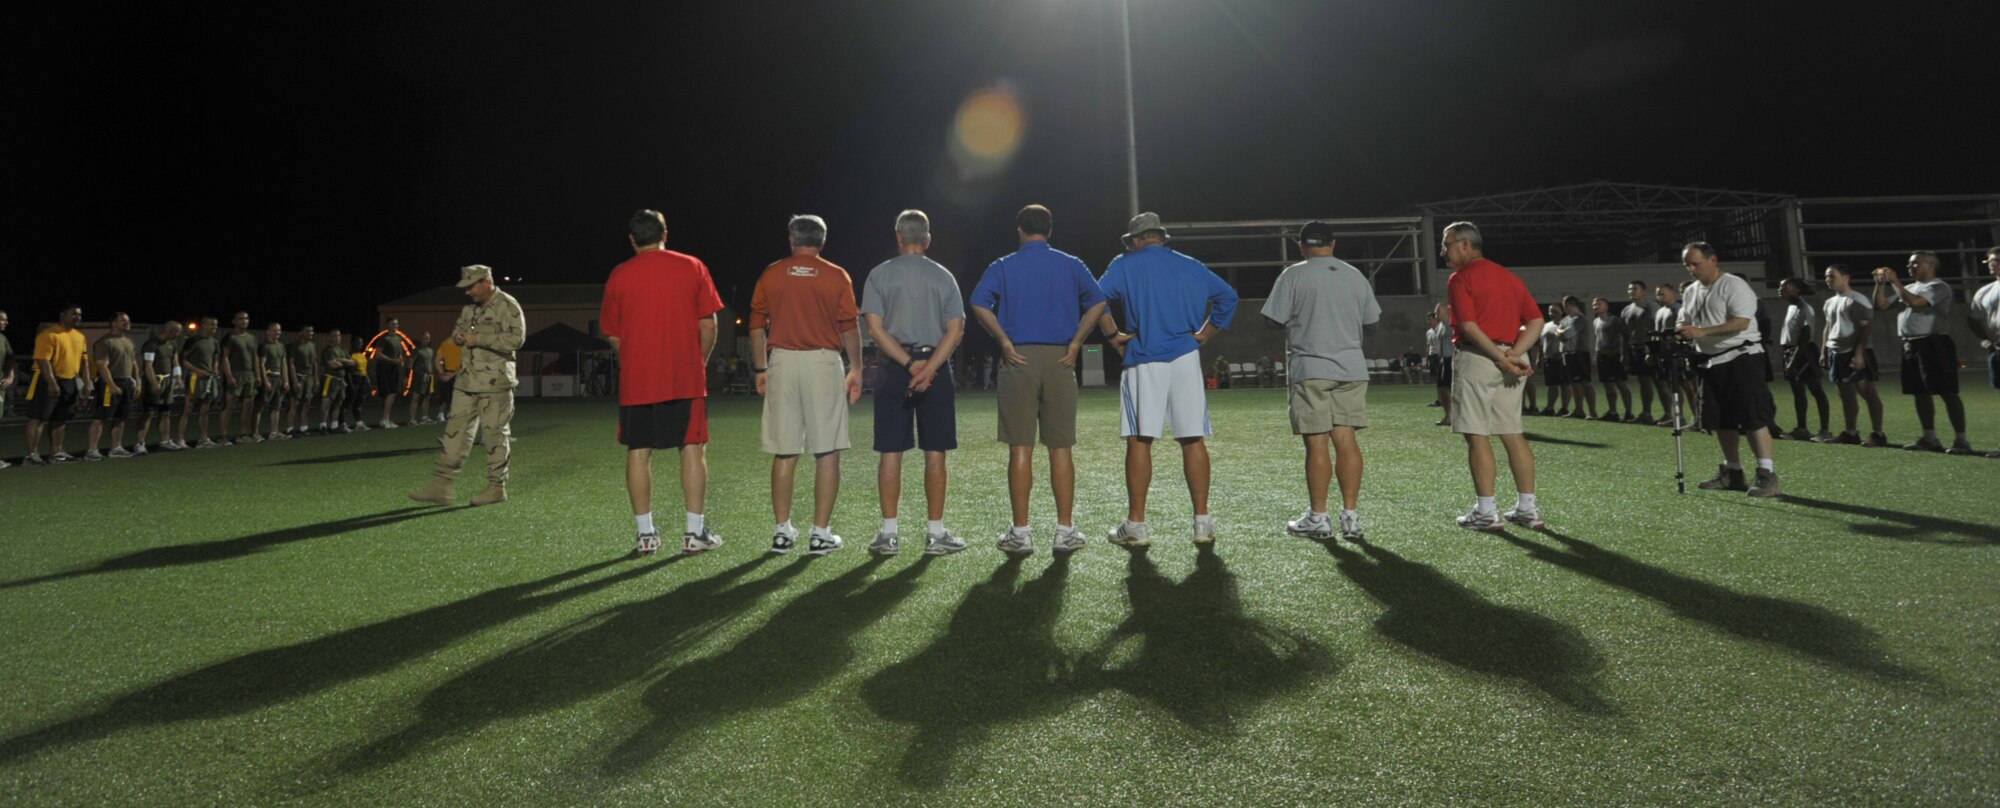 Seven NCAA football coaches--Houston Nutt of Ole Miss, Mack Brown of Texas, Coach Emeritus Tommy Tuberville, Troy Calhoun of Air Force, Rick Neuheisel of UCLA, Jim Grobe of Wake Forest, and Jim Tressel of Ohio State--are introduced before an Air Force/Army versus Marines/Navy flag football game at Camp Lemonier in Djibouti, Africa, on June 2. The coaches visited the camp during Coaches Tour 2009, a morale-boosting mission that also brought them to servicemembers in Europe and Iraq. (U.S. Air Force photo/Tech. Sgt. Jason Schaap) 